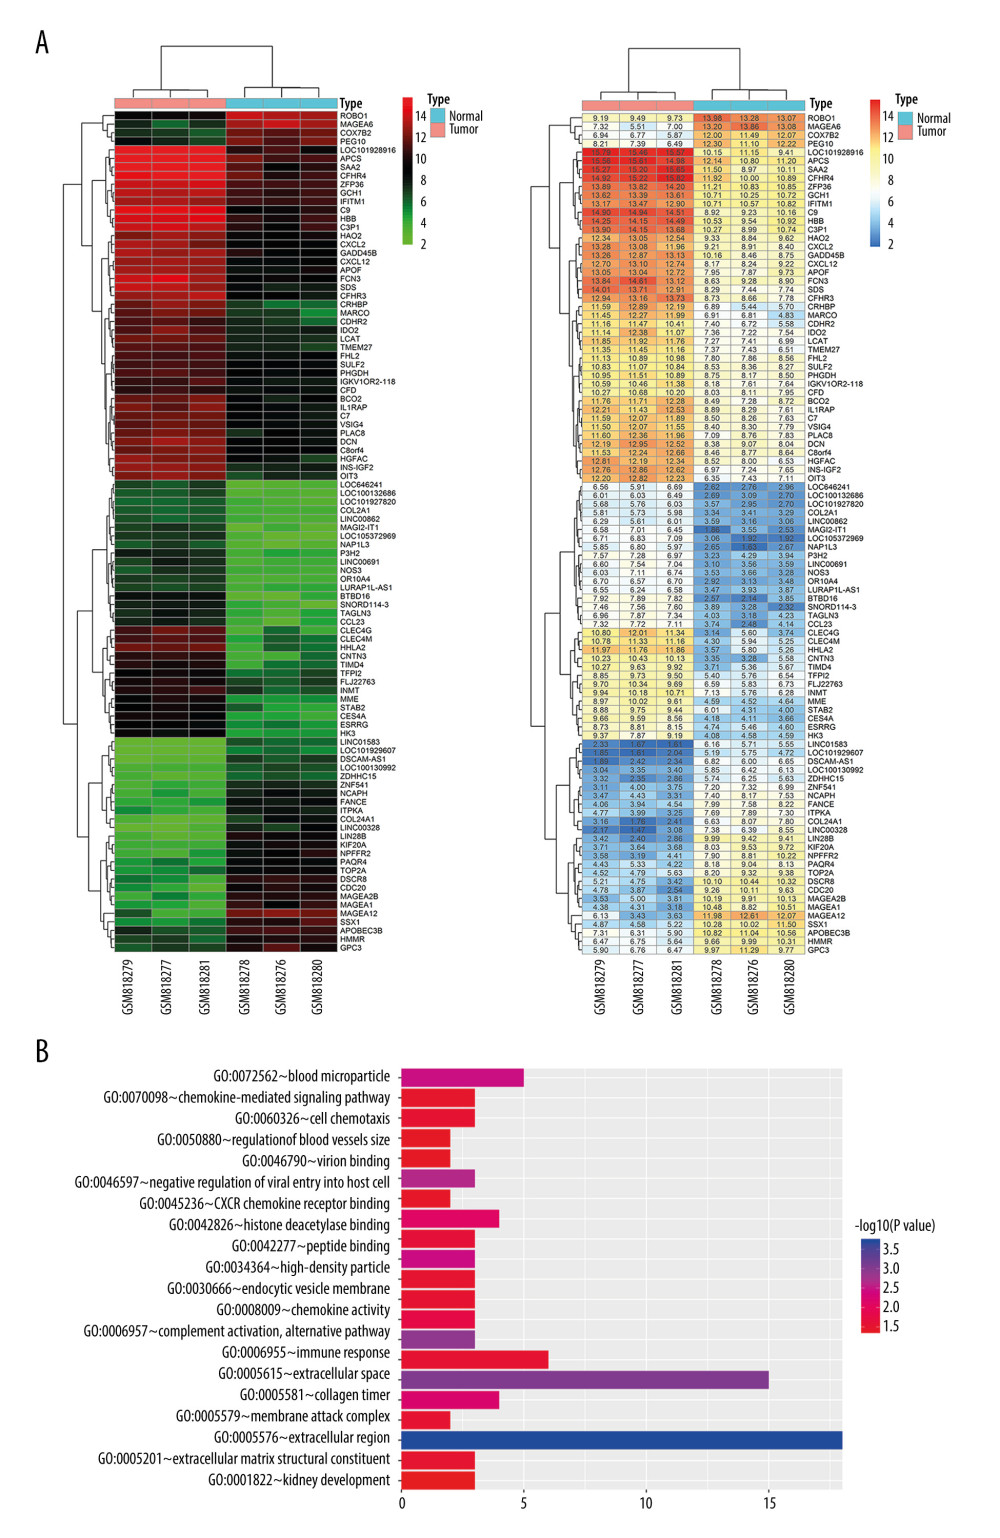 Bioinformatic analysis of HHLA2 expression in hepatocellular carcinoma. (A) Heat map of genes differentially expressed between cancer and normal tissue from the data set GSE33006. (B) Gene ontology analysis of genes from panel A.